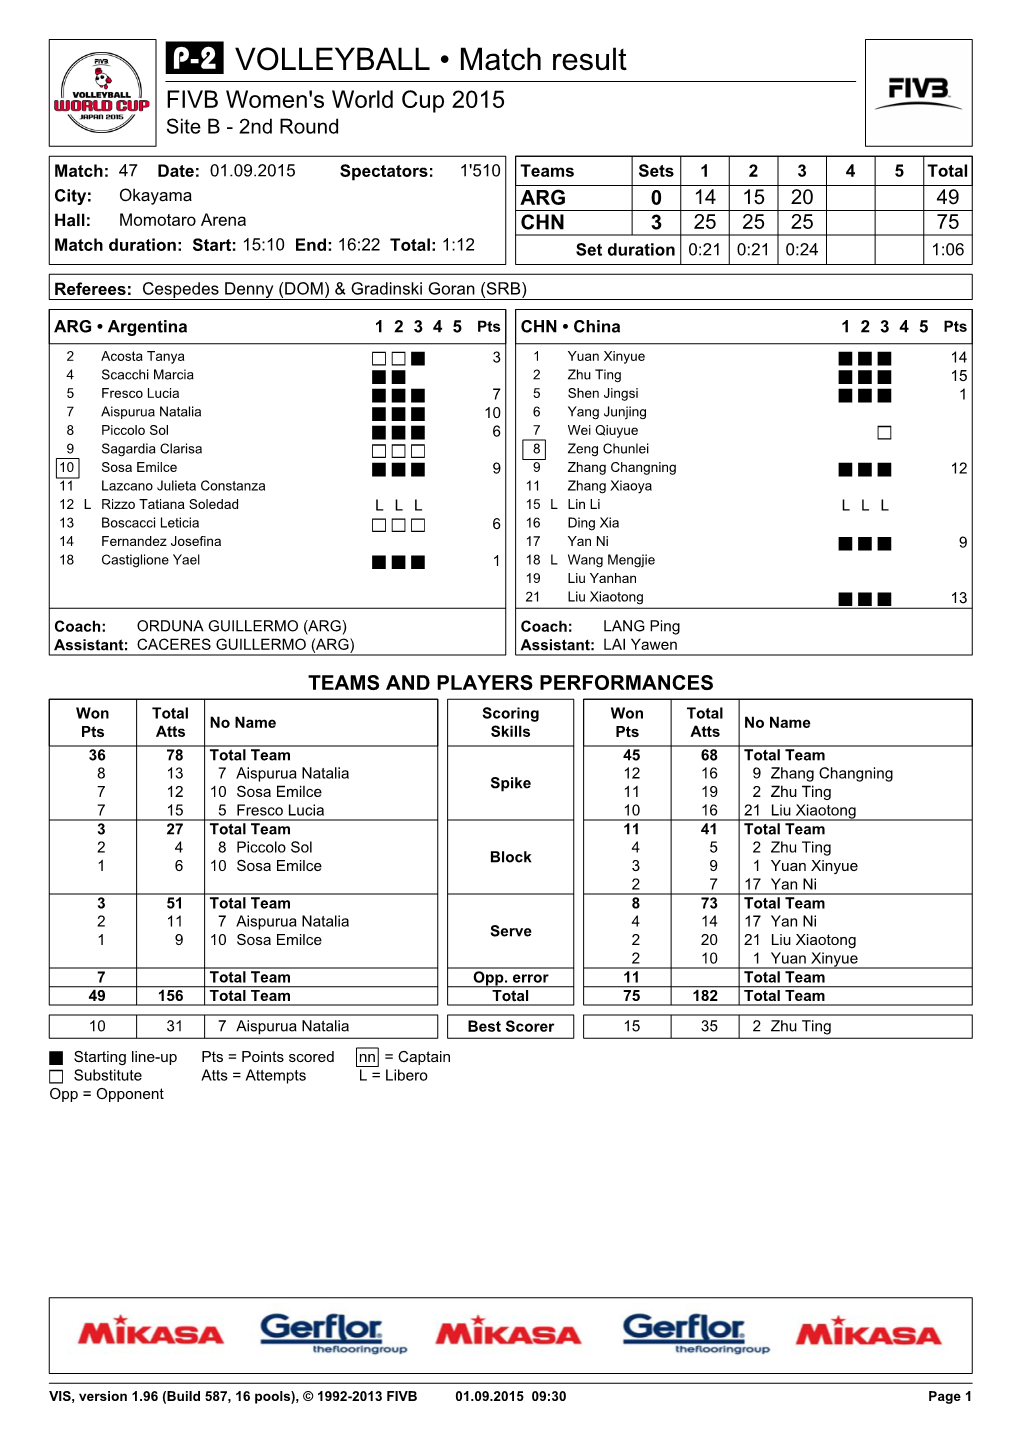 VOLLEYBALL • Match Result FIVB Women's World Cup 2015 Site B - 2Nd Round